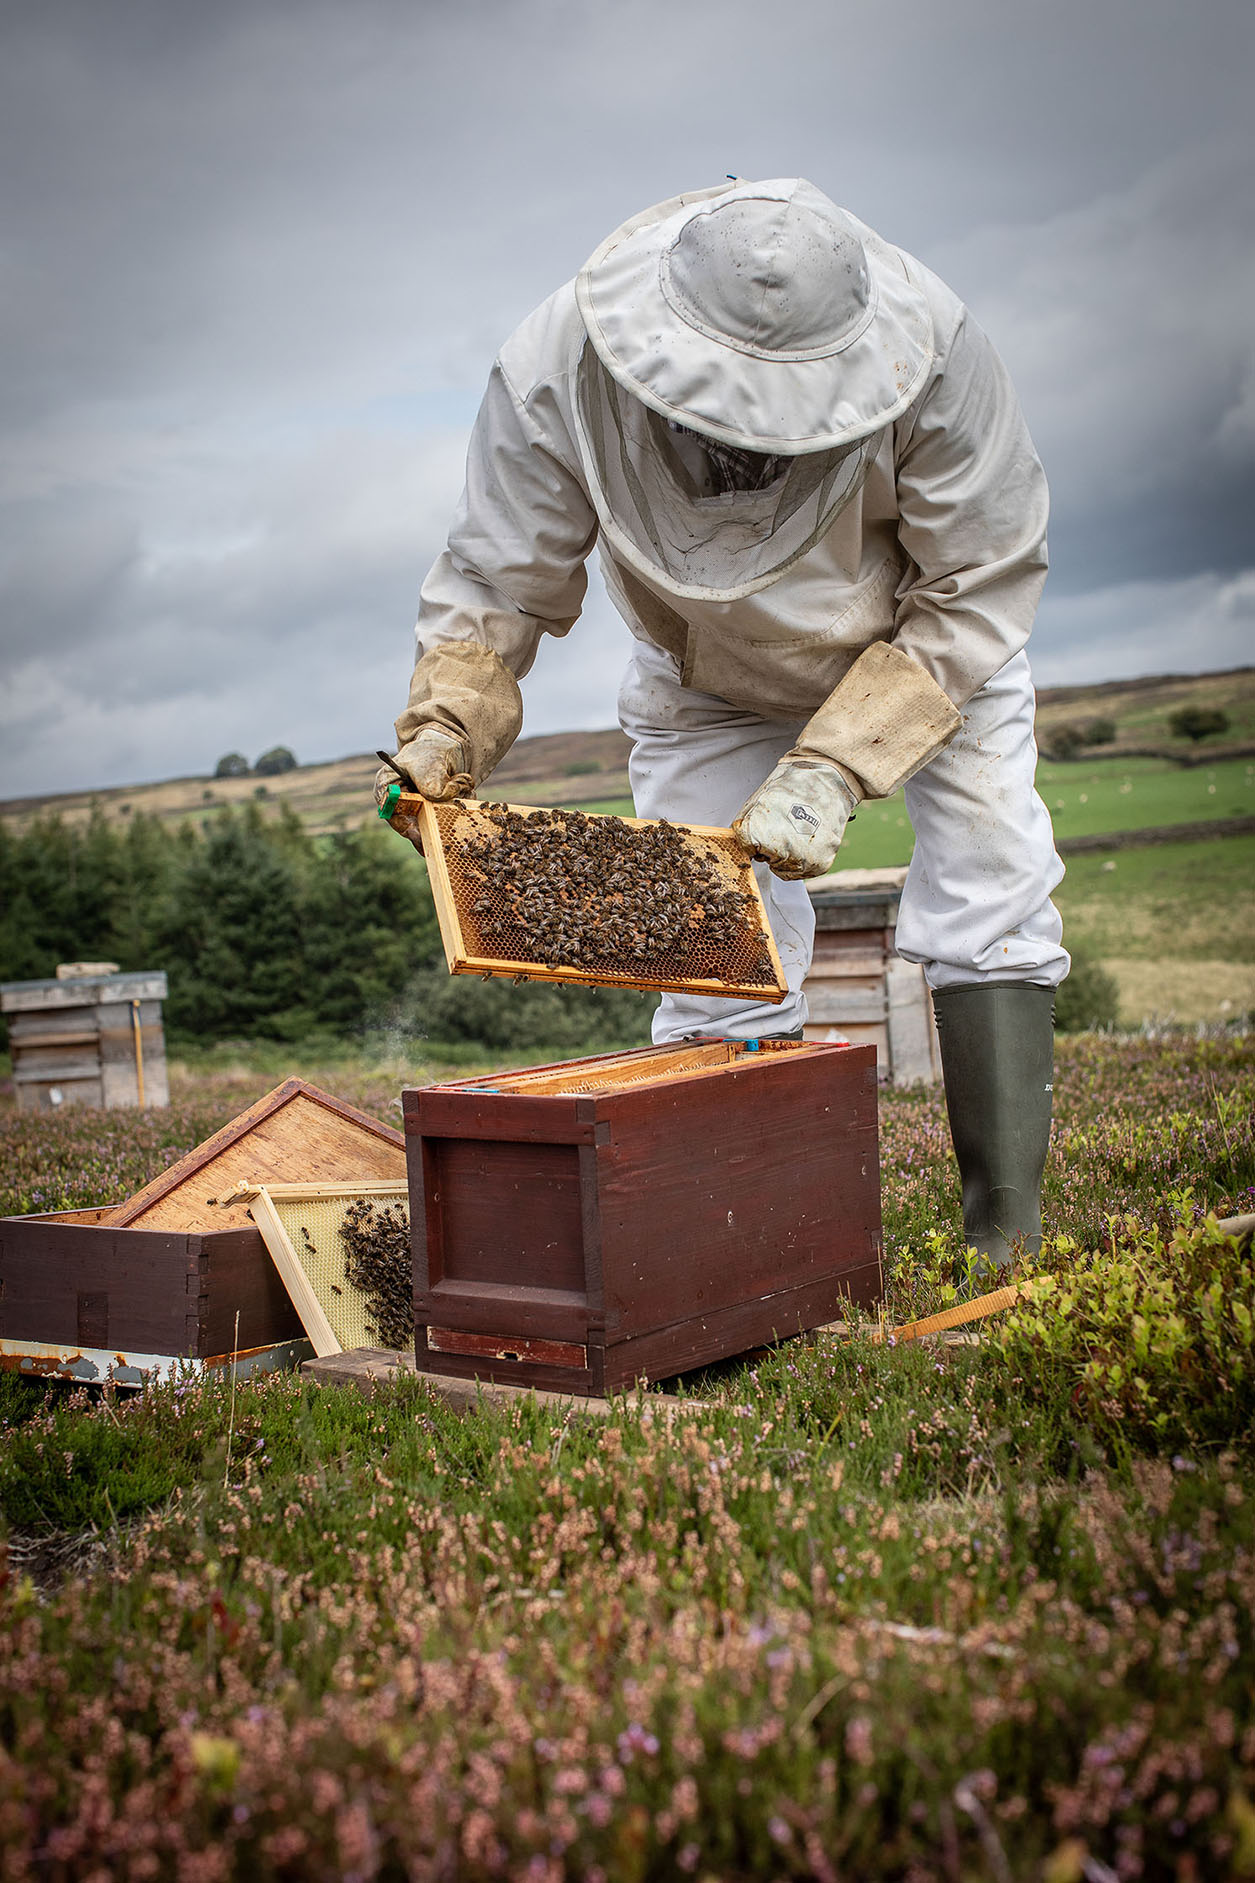 Beekeeper lifting out frame covered in bees by Polly Baldwin